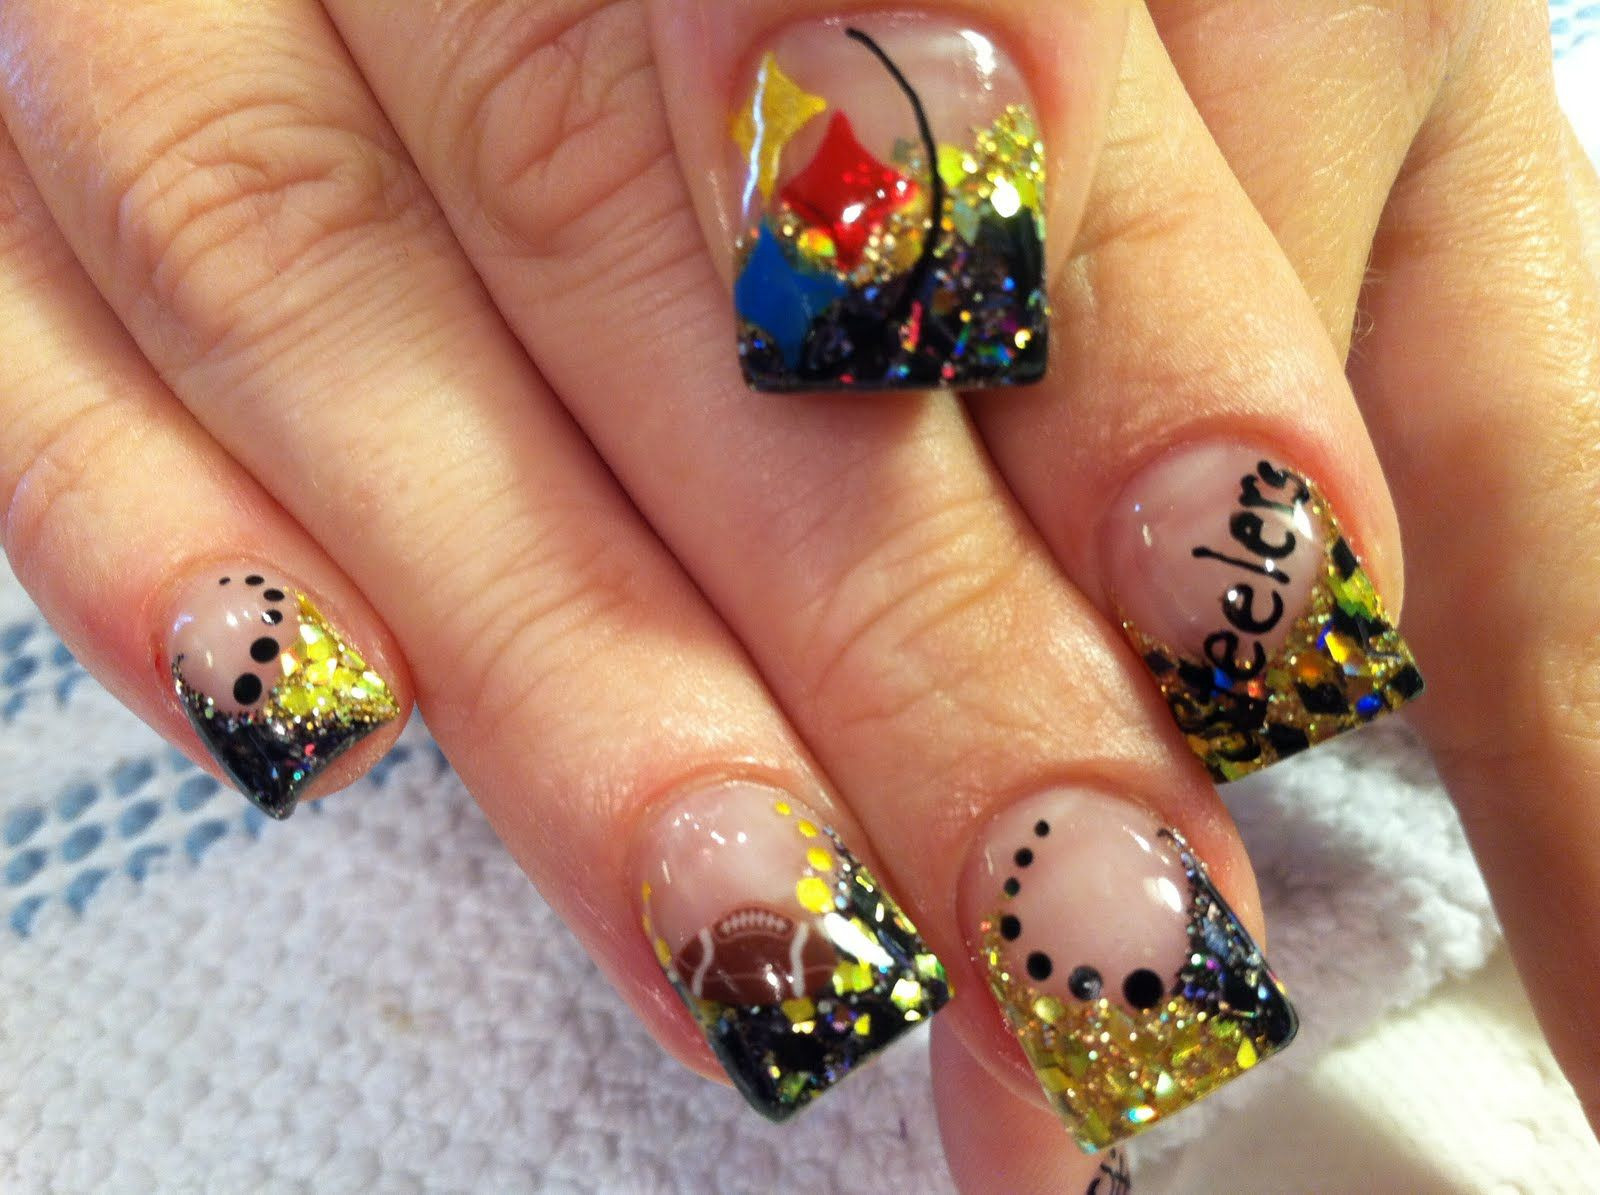 Pittsburgh Steelers Nail Designs
 As much as I dislike the steelers These are freaking